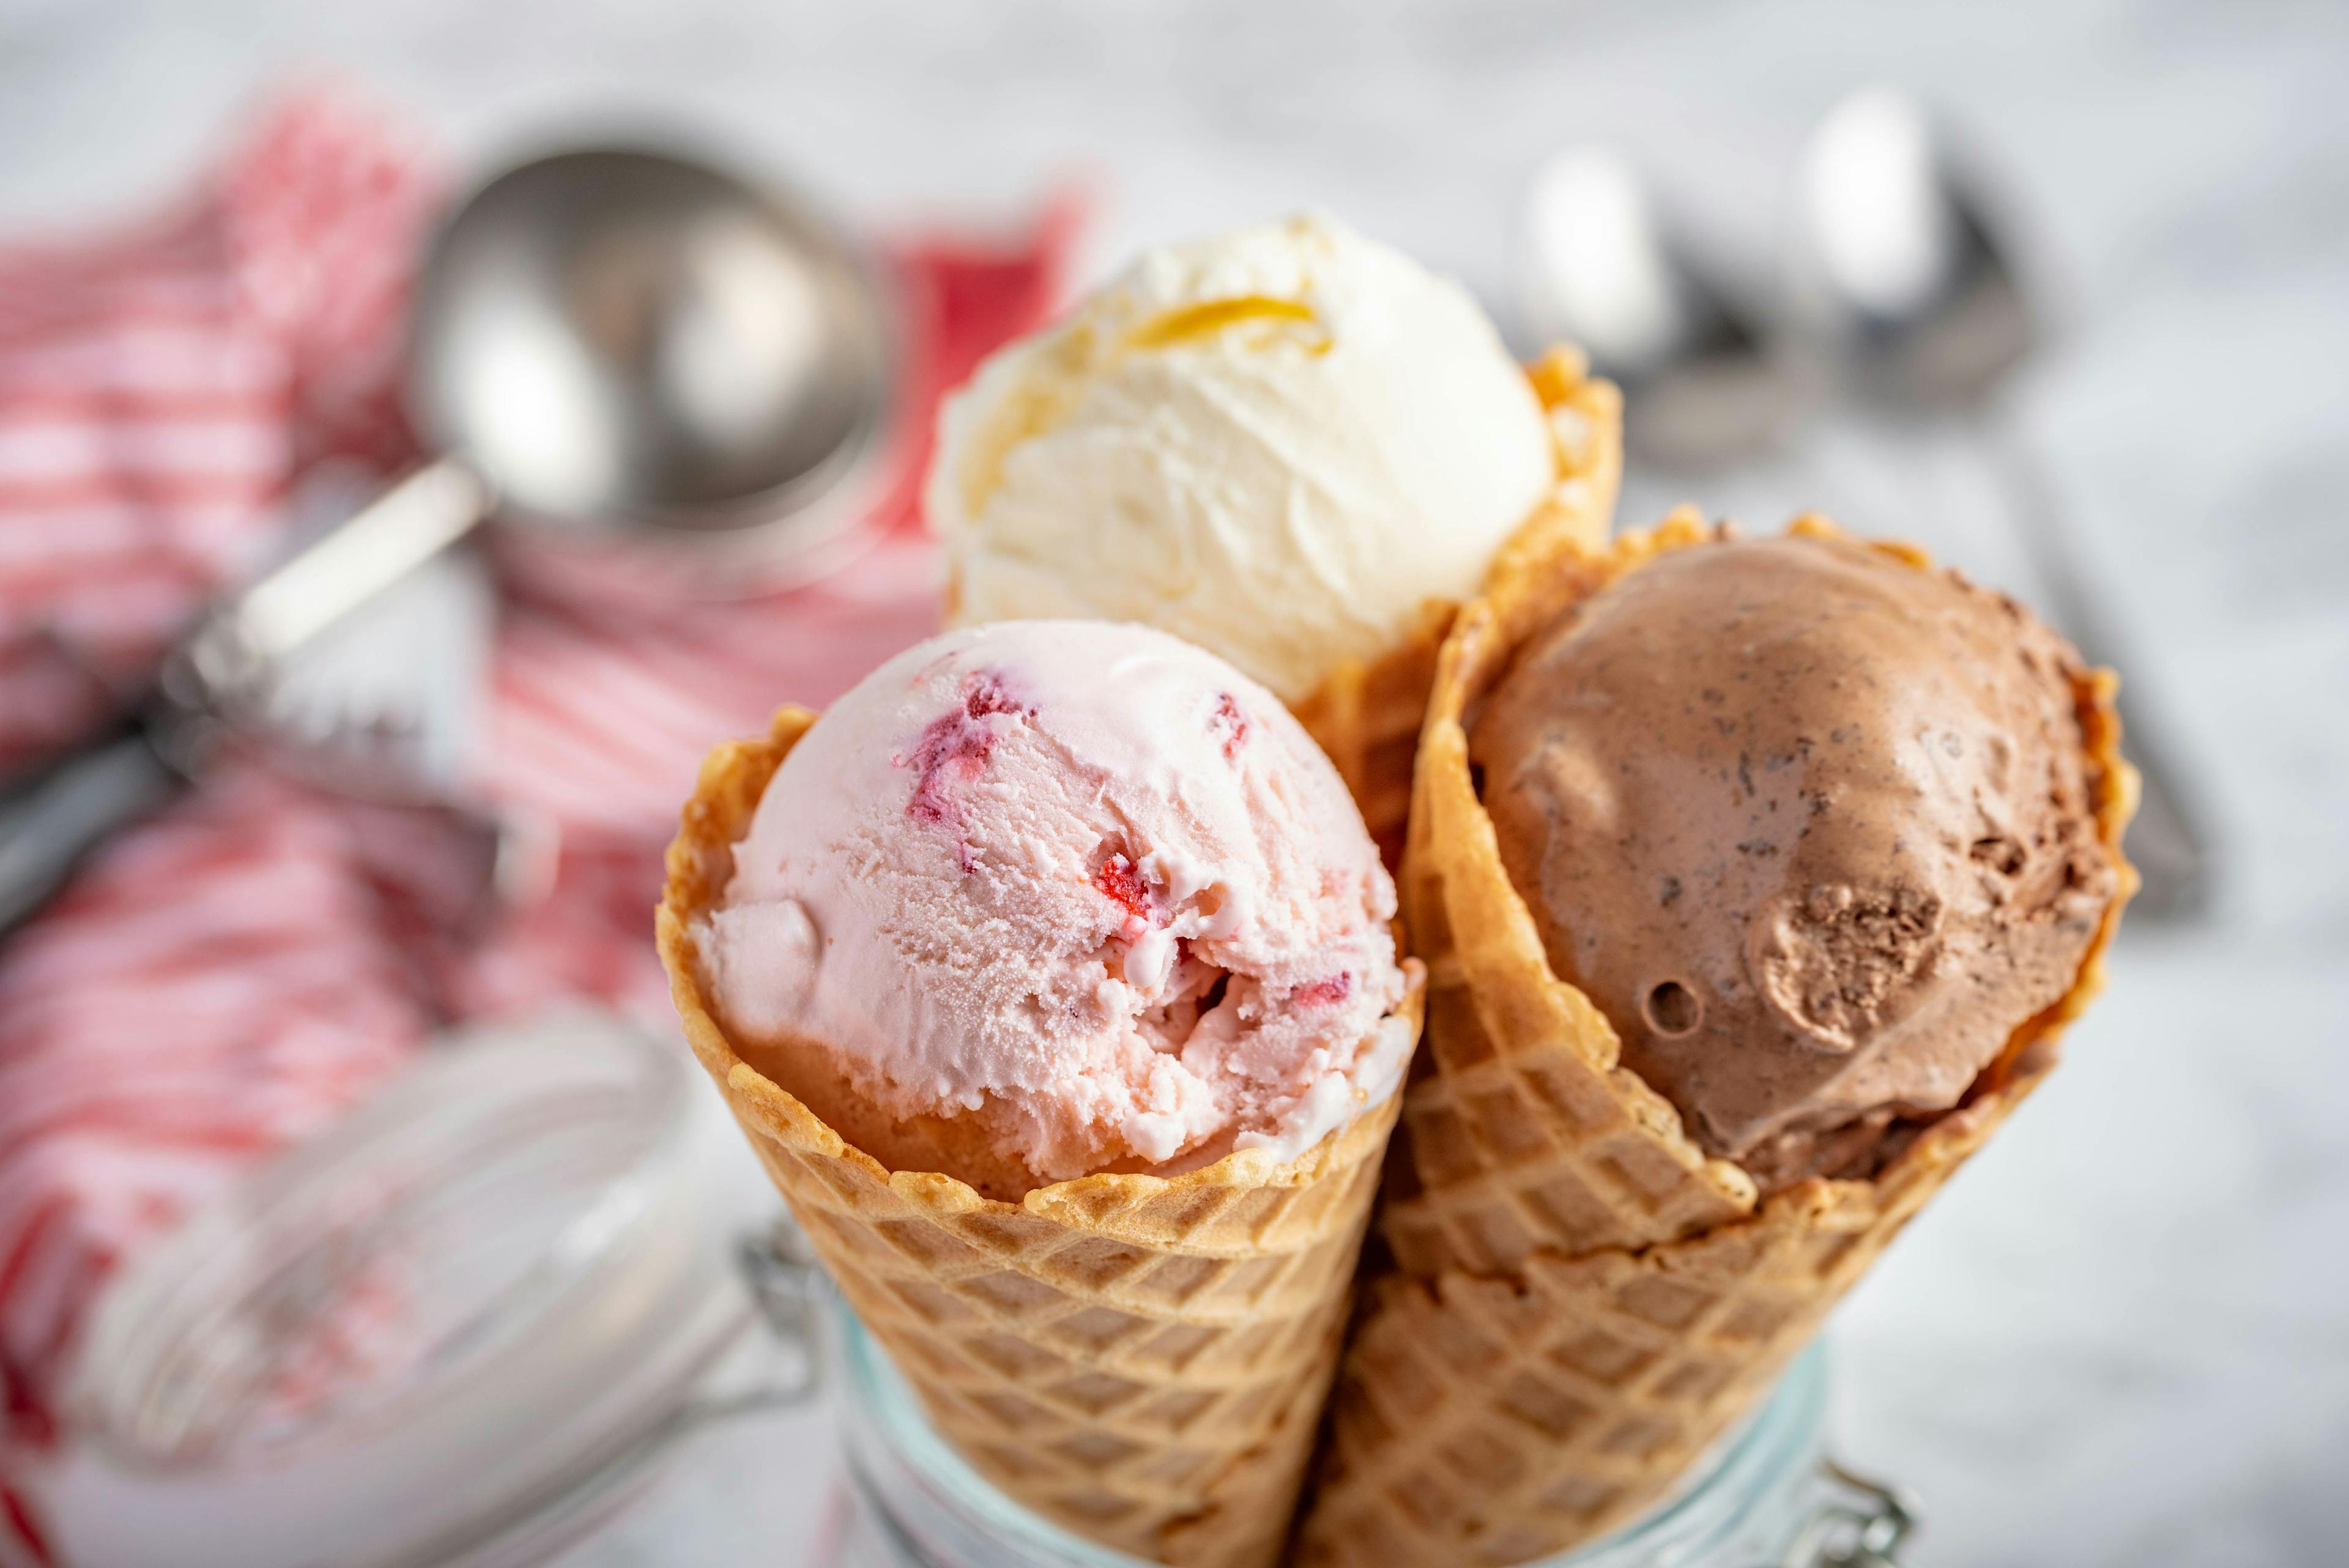 strawberry, vanilla, chocolate ice cream woth waffle cone on marble stone backgrounds | Image Credit: © ahirao - stock.adobe.com